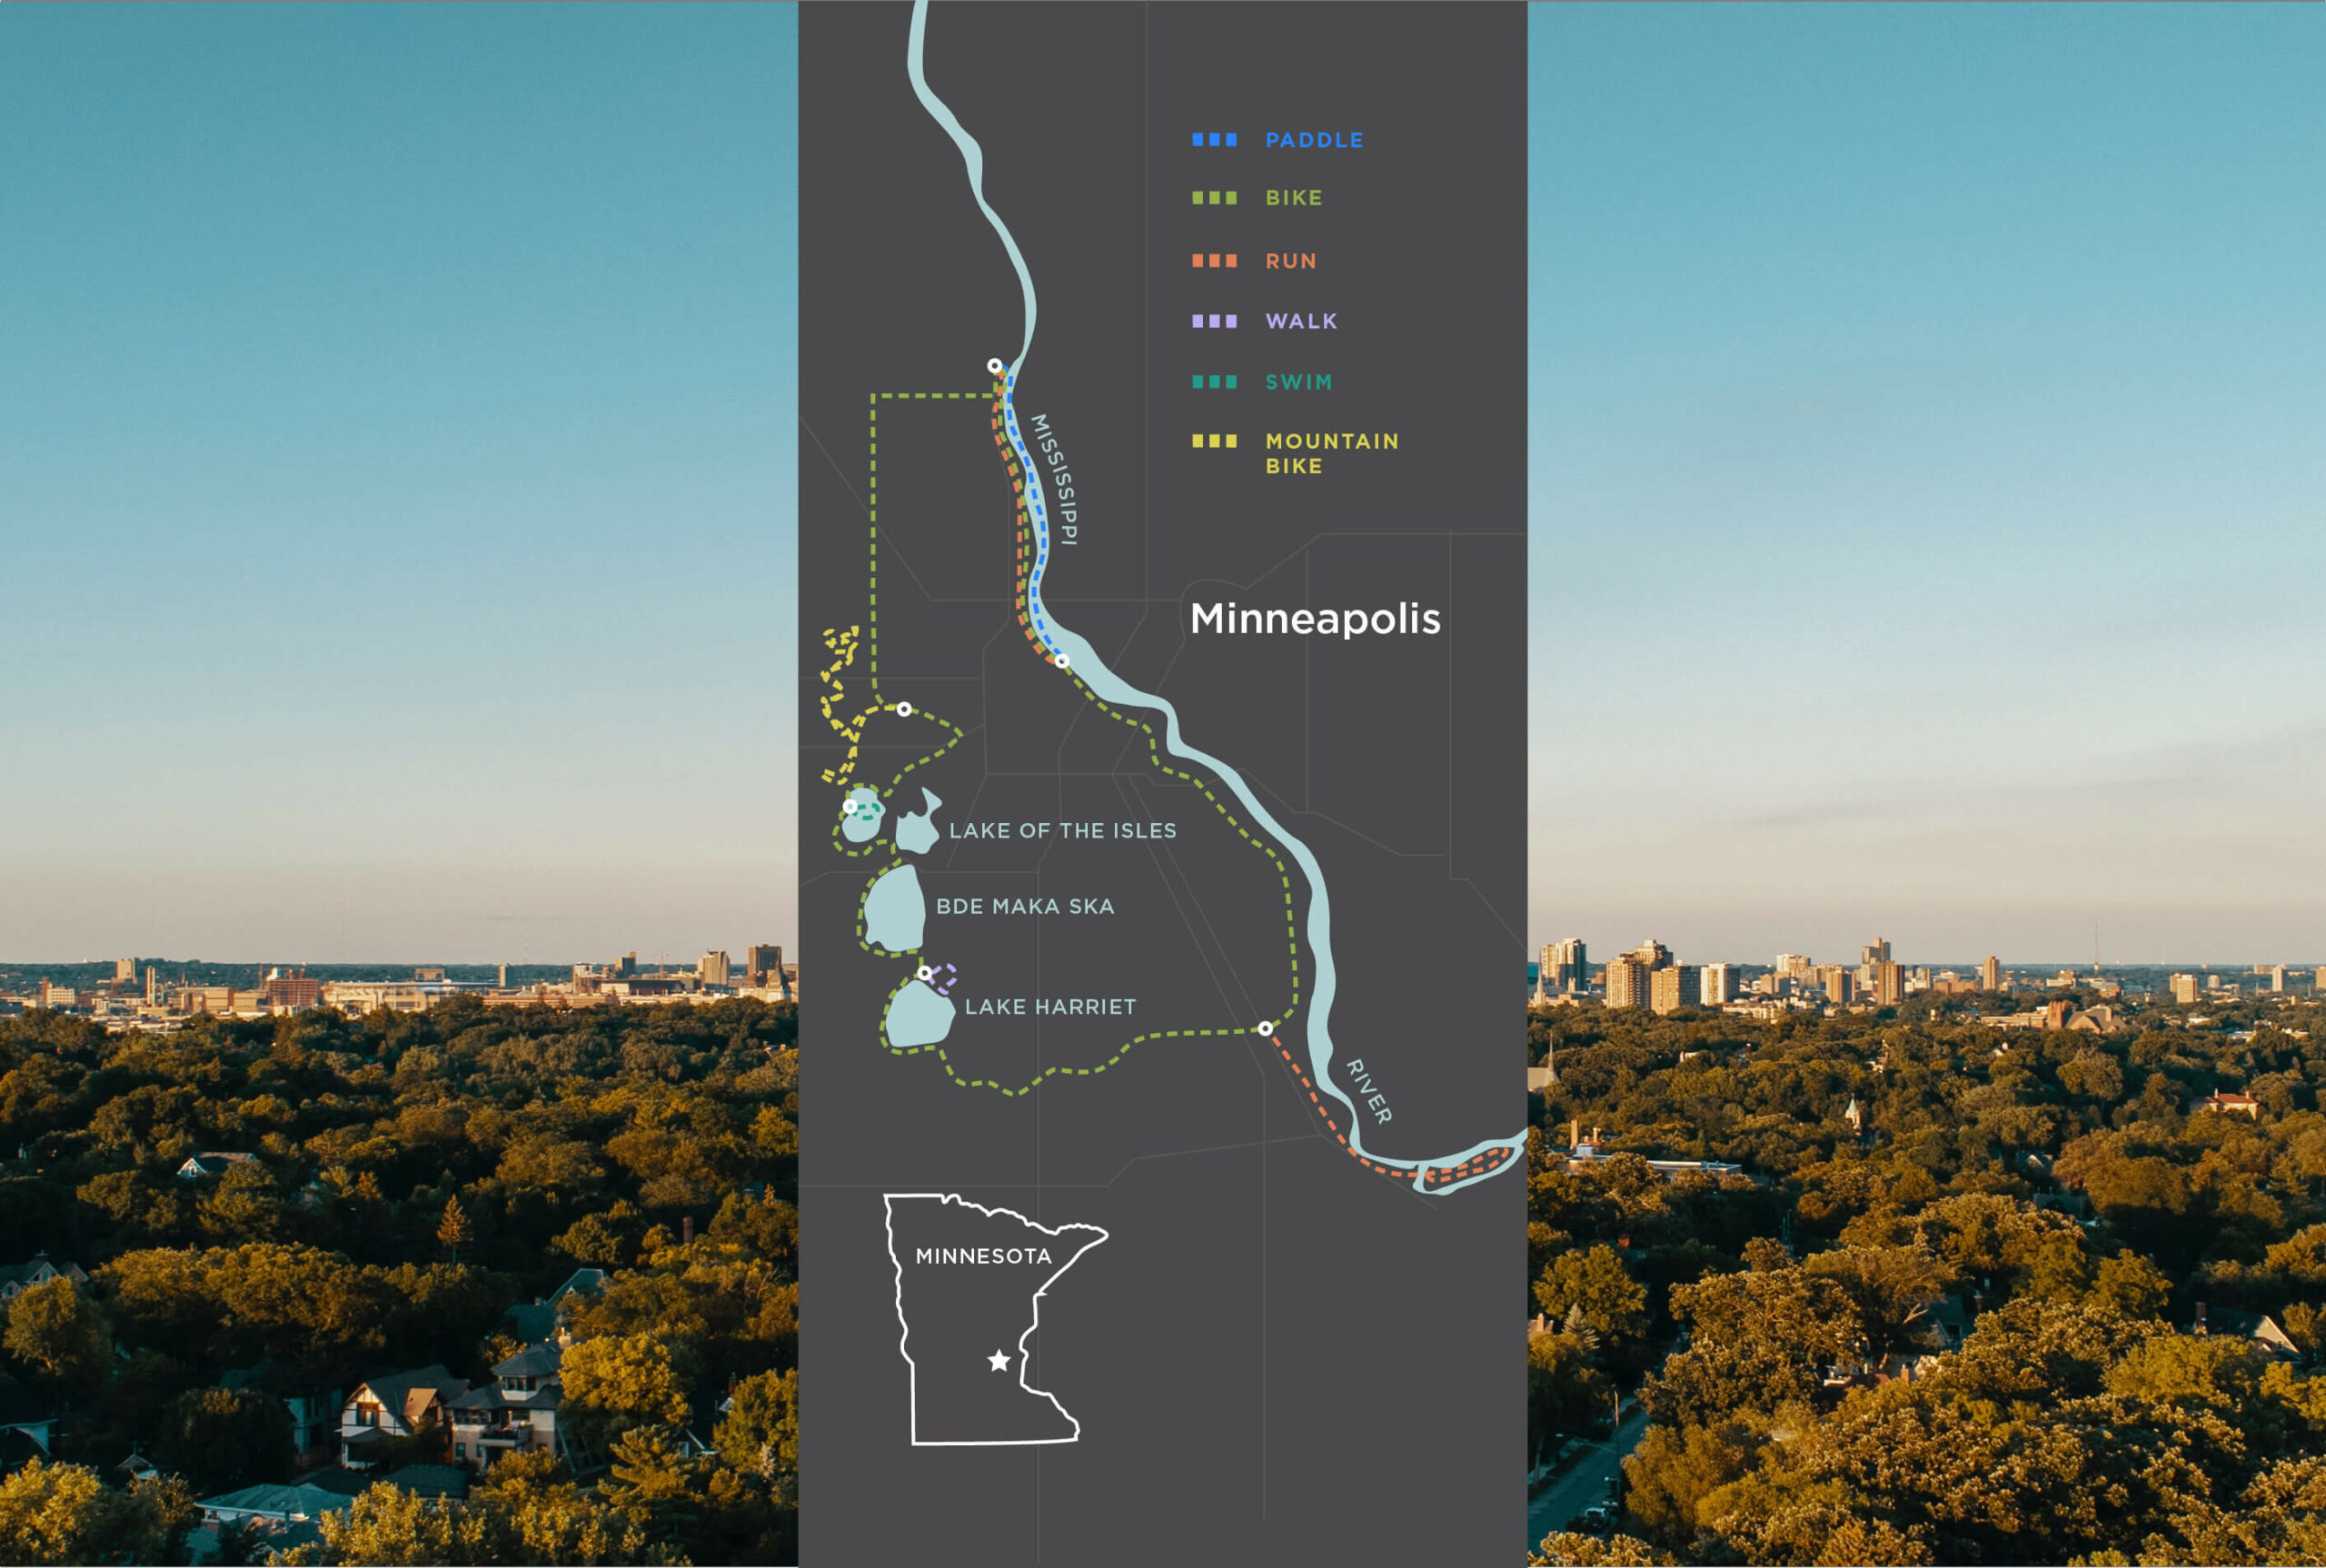 Graphic showing Shannon's route along the Mississippi River